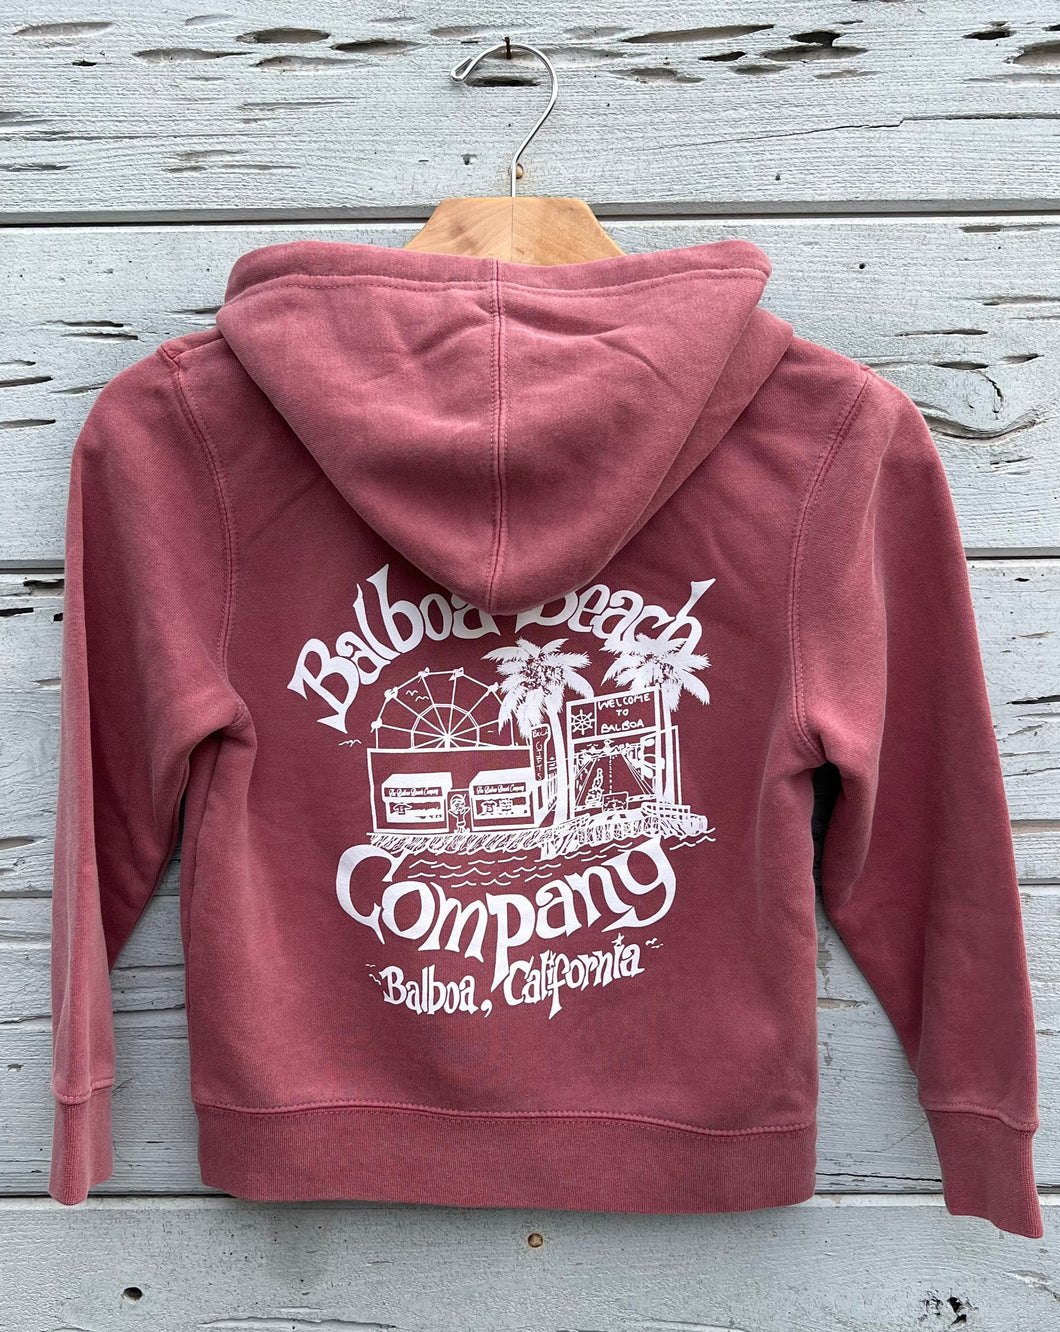 Fun Zone Youth Pullover Hoodie Maroon